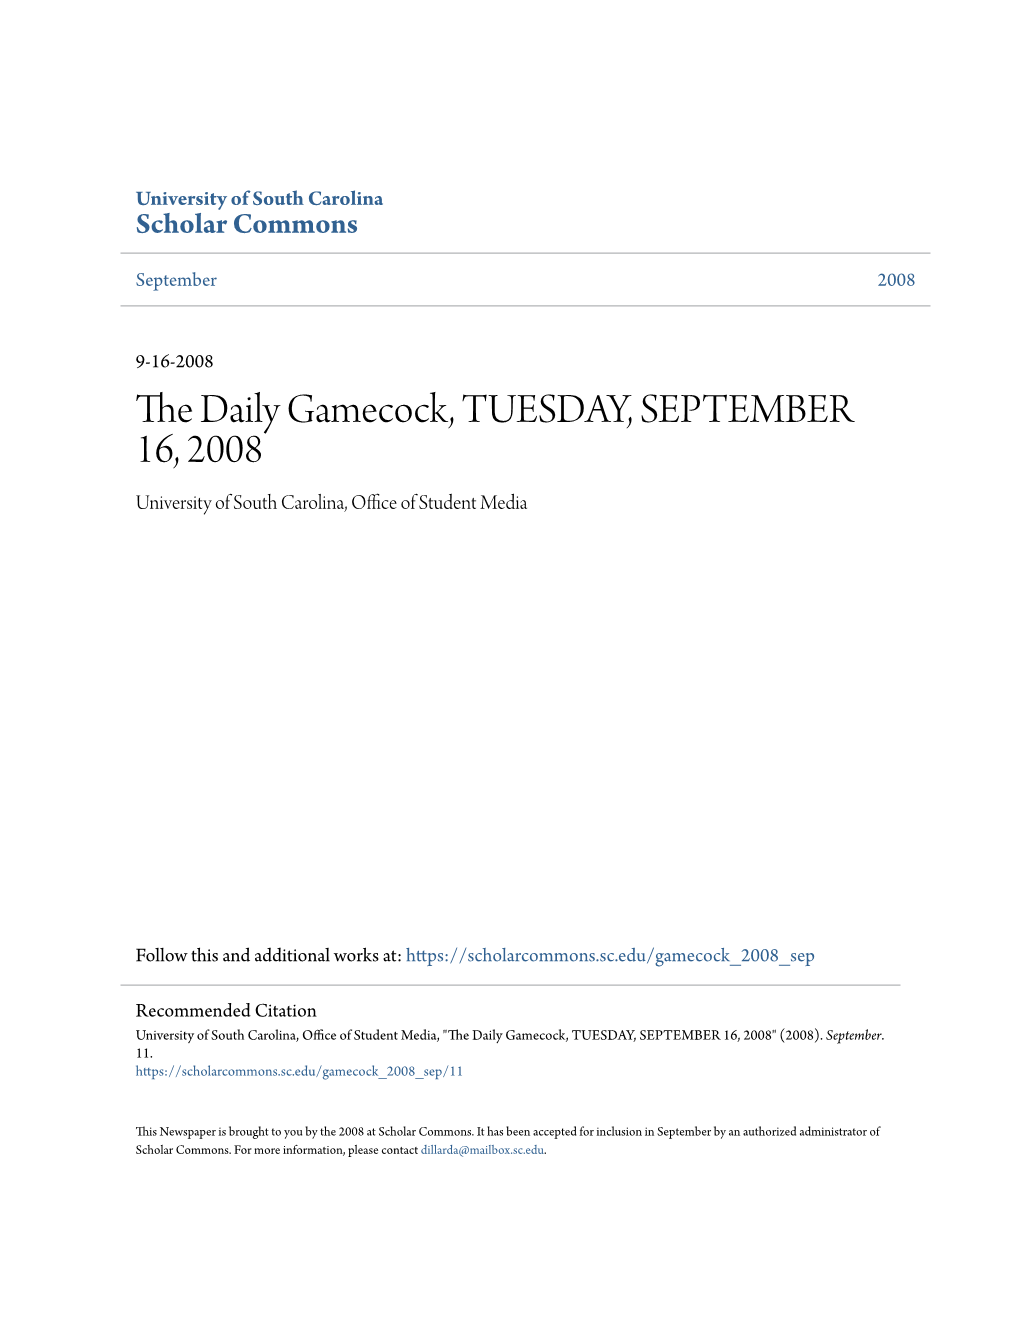 The Daily Gamecock, TUESDAY, SEPTEMBER 16, 2008